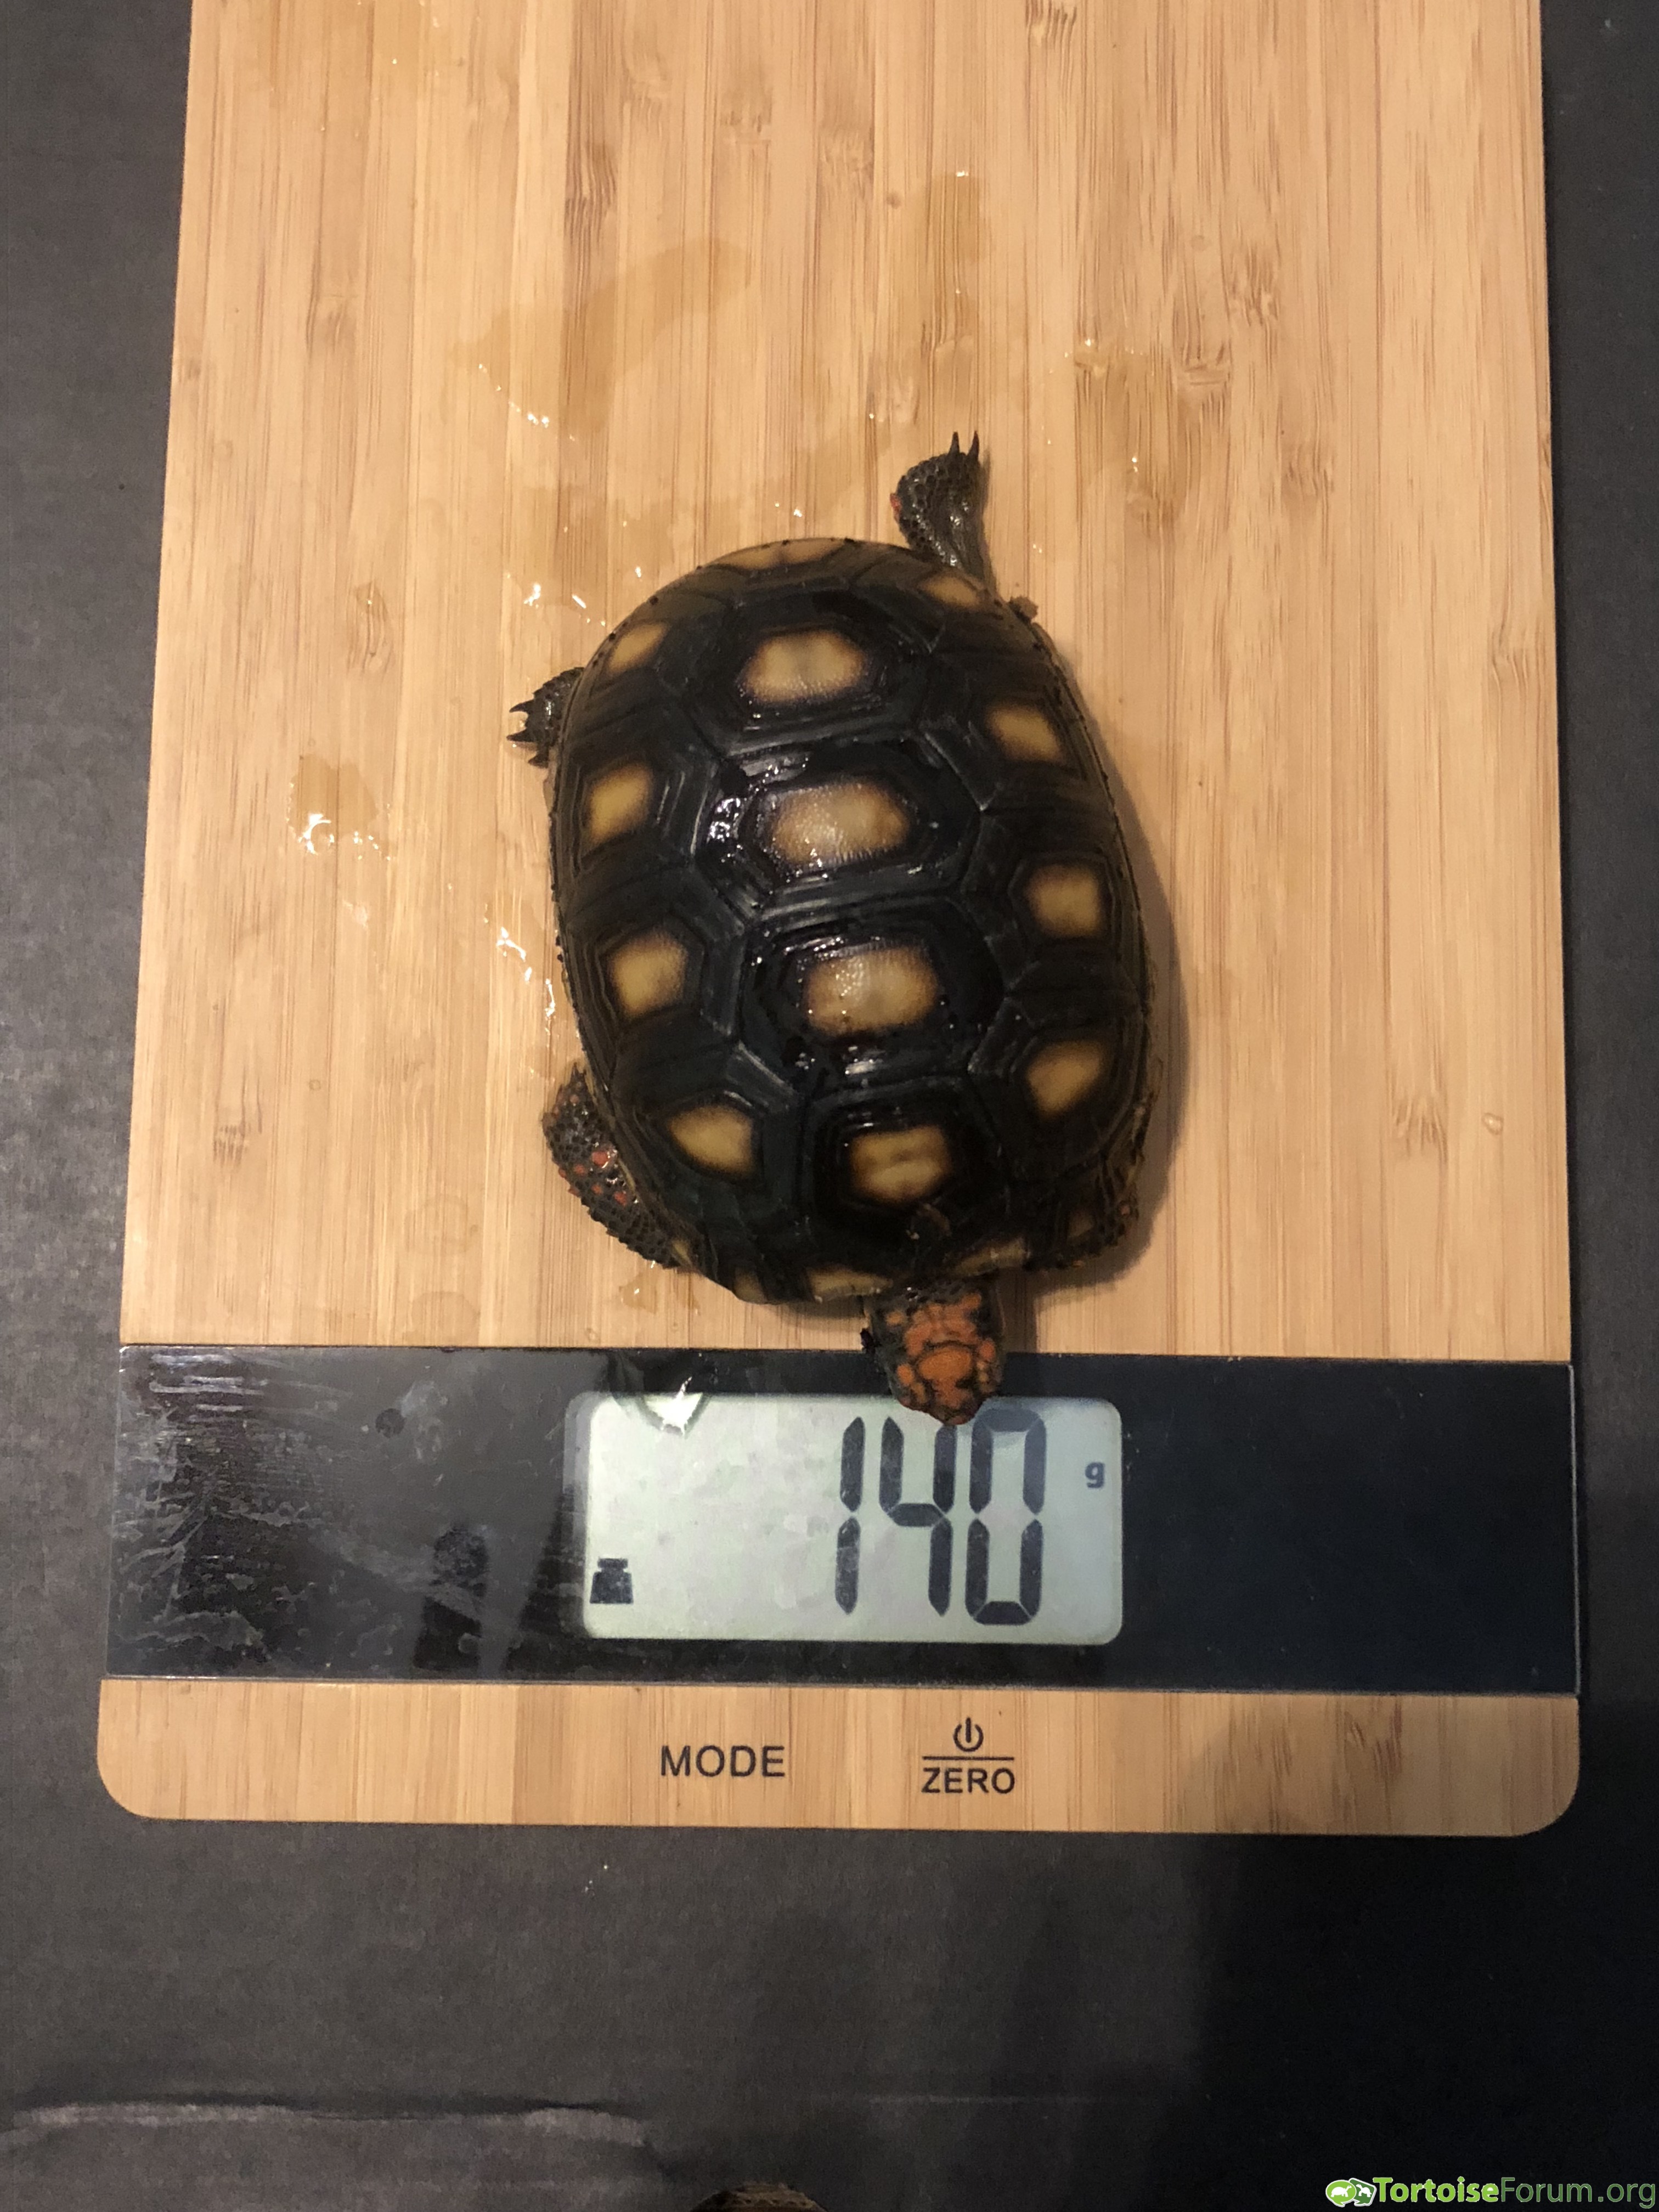 Weight on 2-5-18